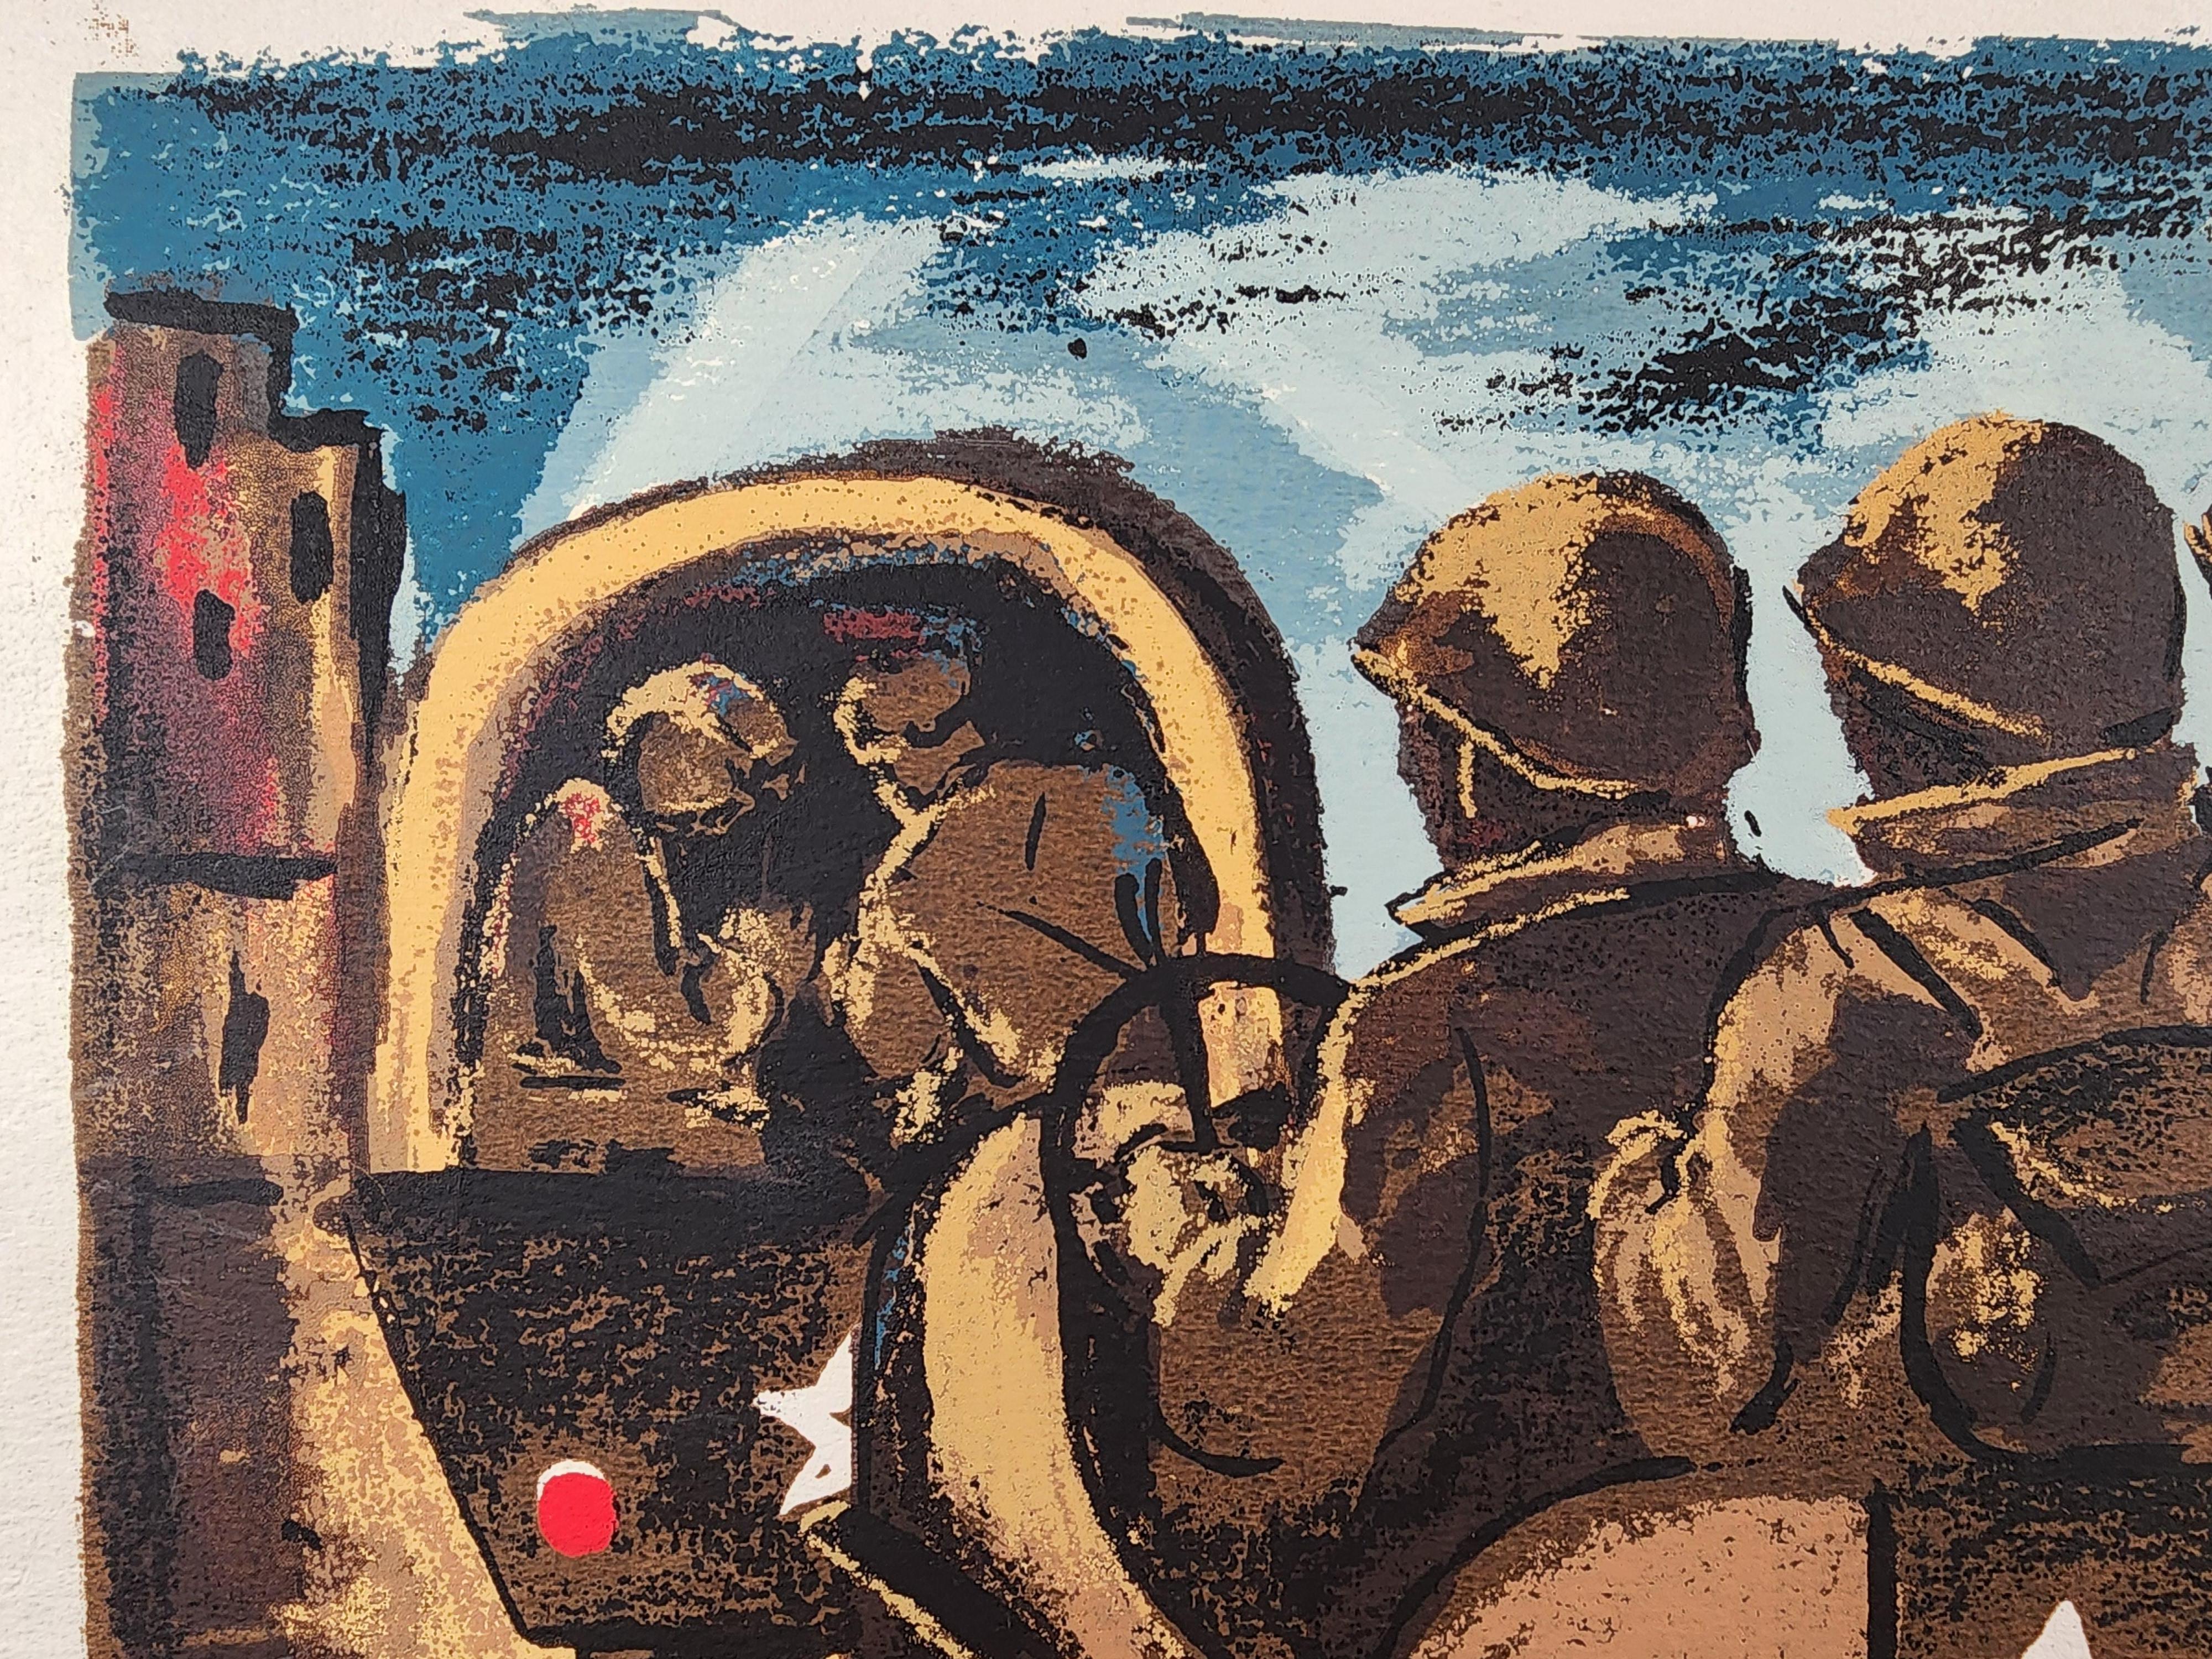 A WW2 themed screen print by New York City artist Riva Helfond depicting soldiers in a convoy.
Helfond is well known for her participation in the WPA and for her screen prints.
Signed in the image and again in the margin, lower right corner.